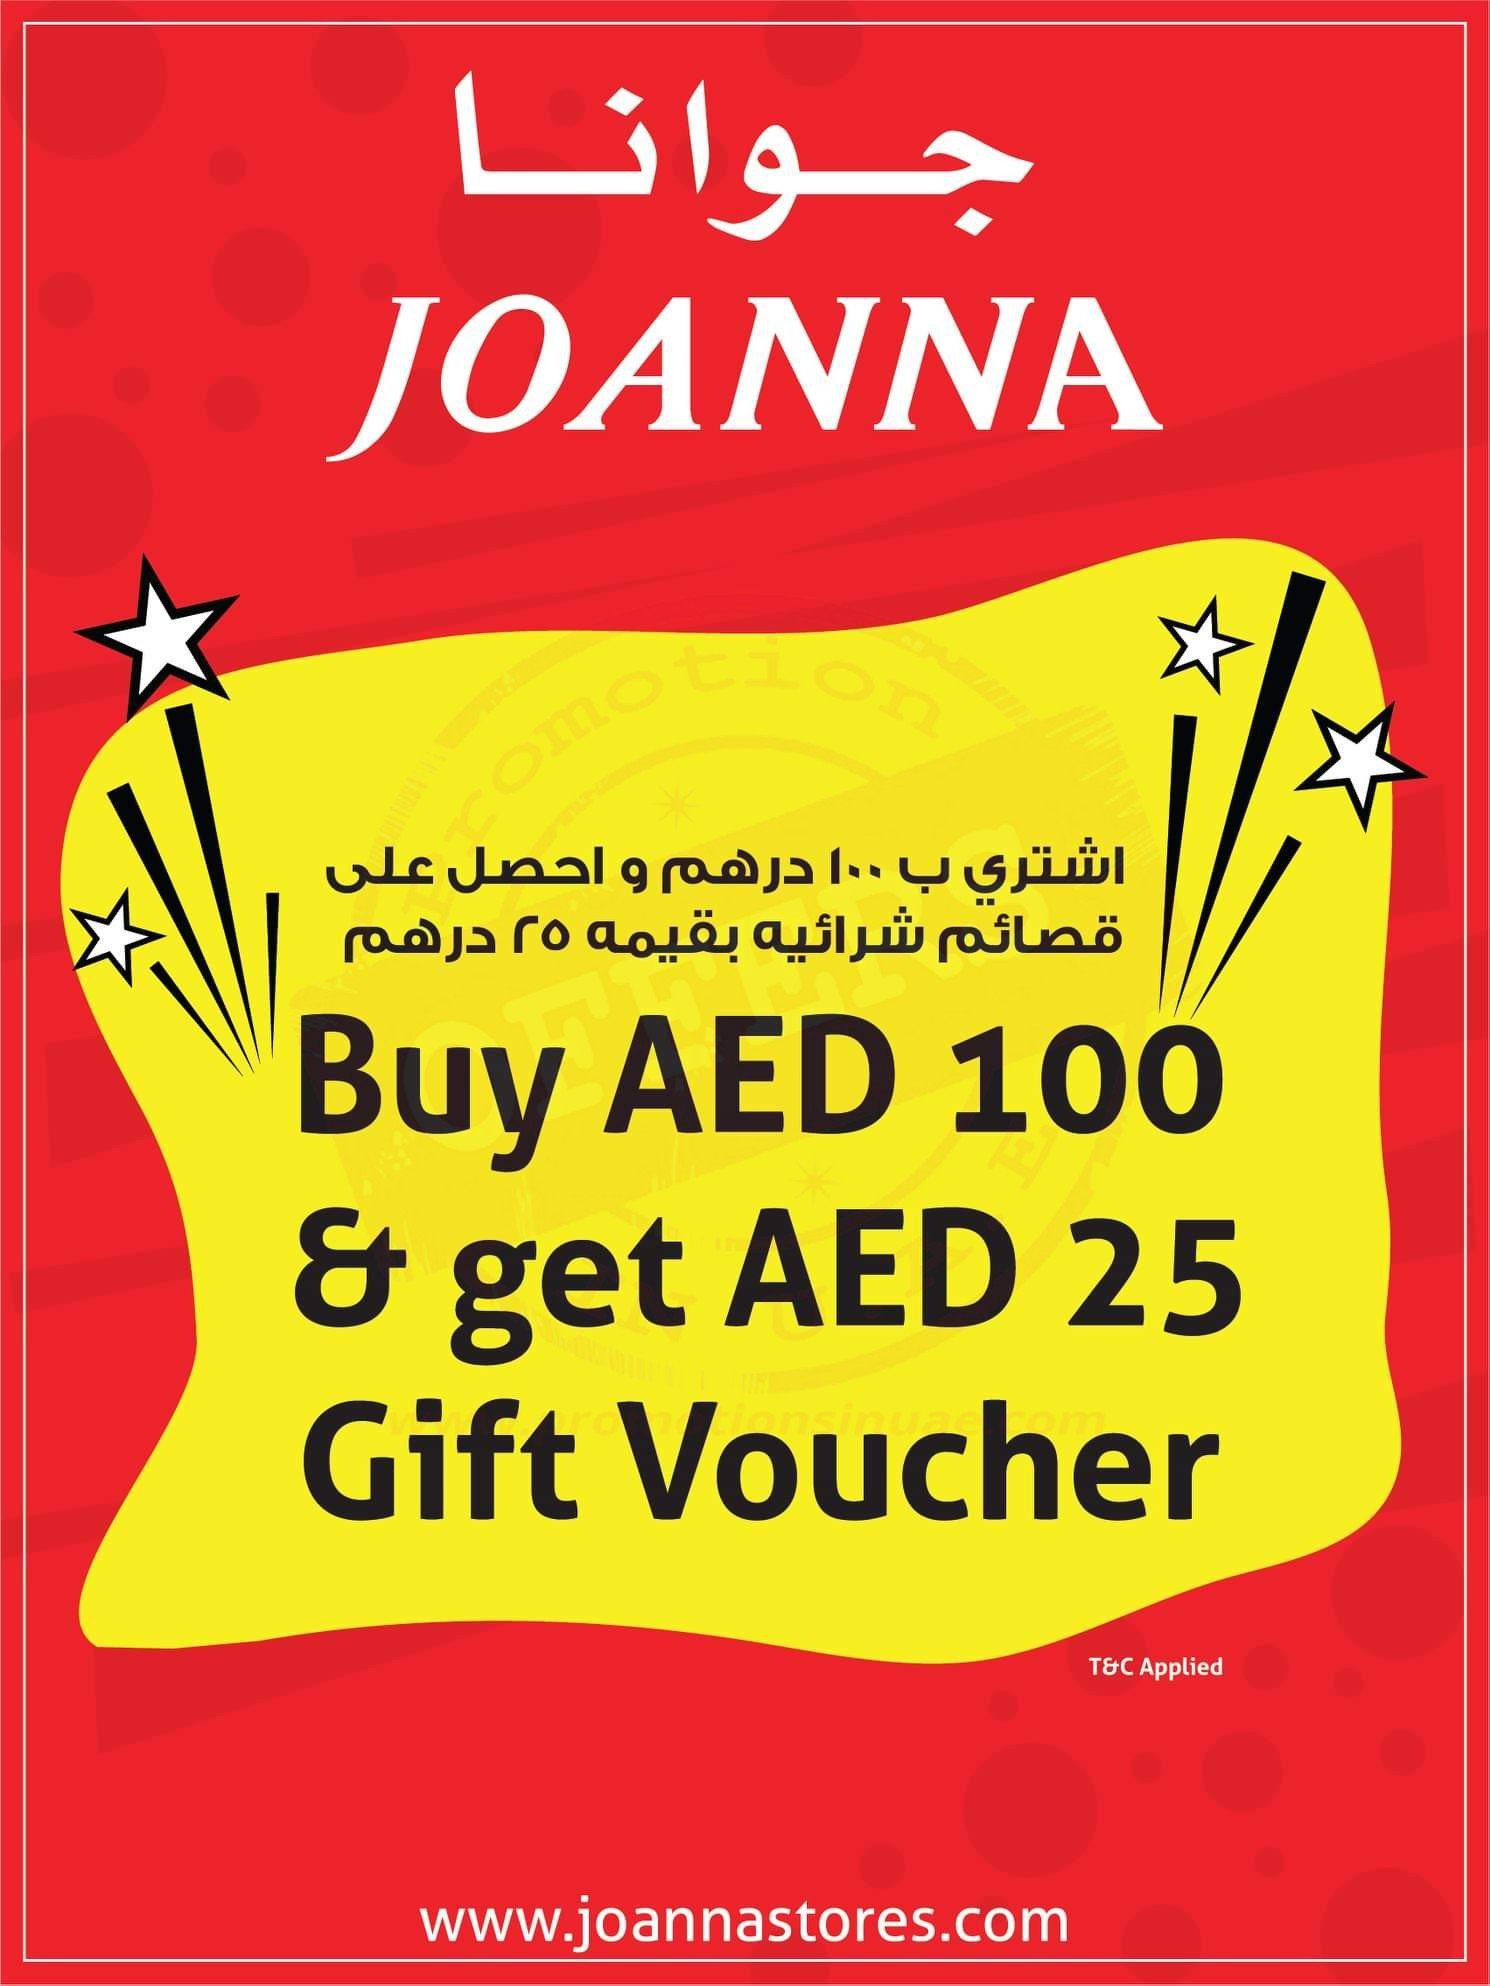 BUY AED 100/- and GET FREE CASHBACK VOUCHER WORTH AED 25/-  T&C Applied. Joanna Department Store